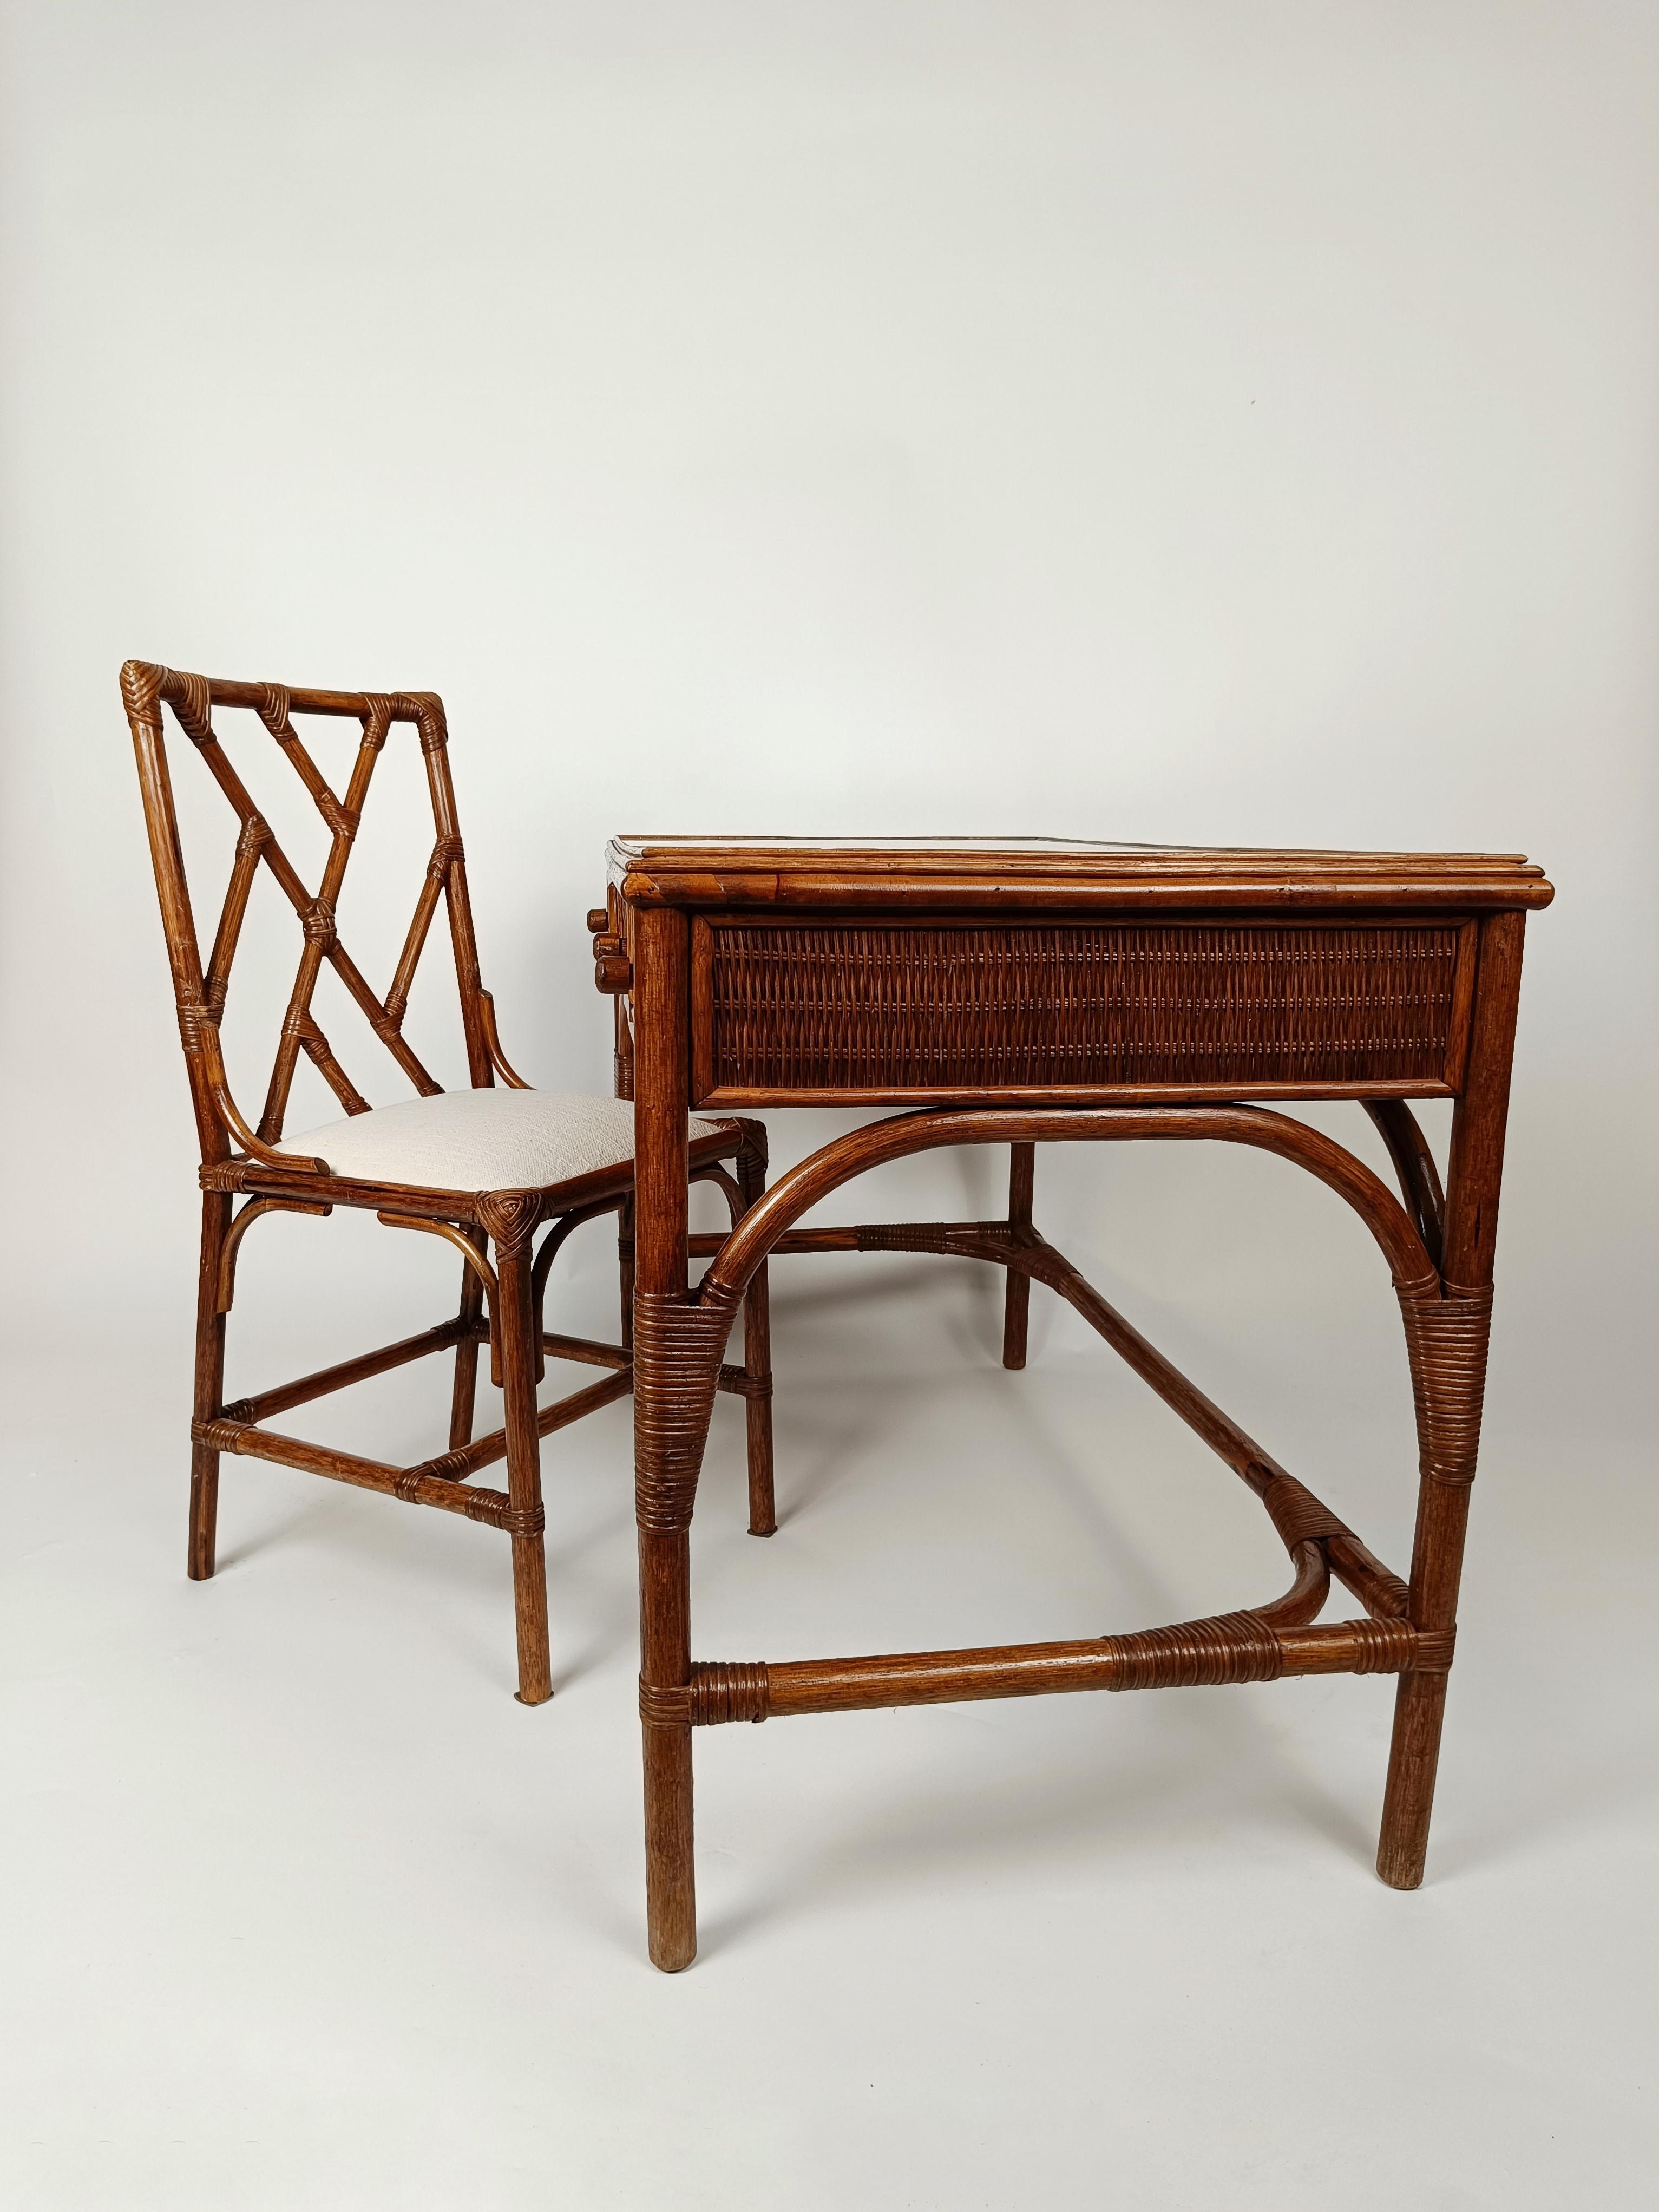 Chinese Chippendale Midcentury Italian Writing Desk with Drawers and Chair, in Bamboo Cane & Wicker For Sale